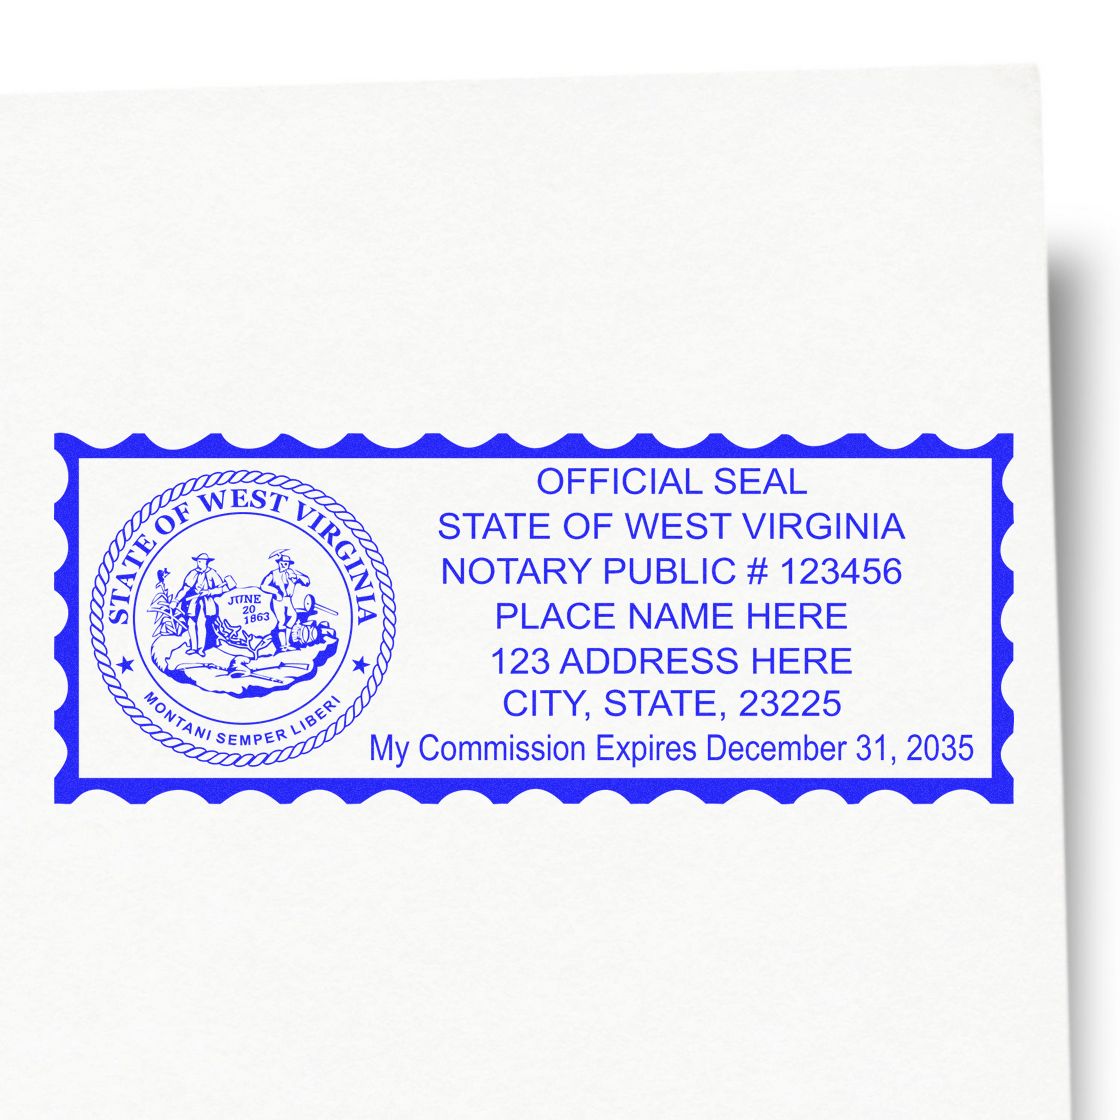 An alternative view of the Heavy-Duty West Virginia Rectangular Notary Stamp stamped on a sheet of paper showing the image in use